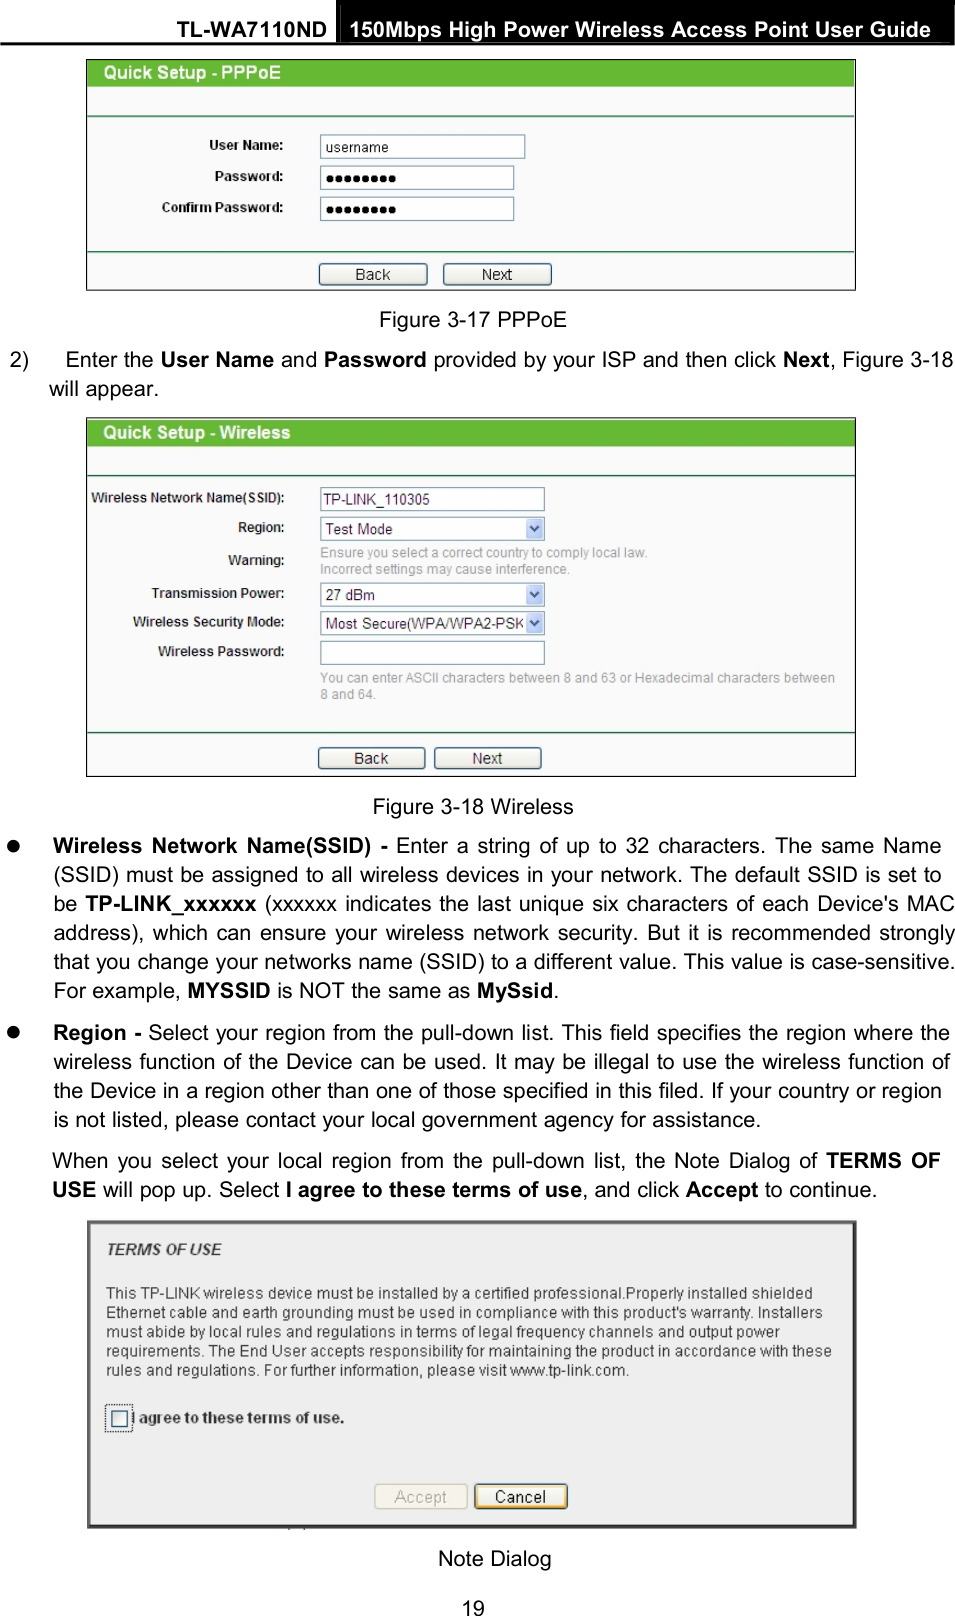 TL-WA7110ND 150Mbps High Power Wireless Access Point User GuideFigure 3-17 PPPoE2) Enter the User Name and Password provided by your ISP and then click Next, Figure 3-18will appear.Figure 3-18 WirelessWireless Network Name(SSID) - Enter a string of up to 32 characters. The same Name(SSID) must be assigned to all wireless devices in your network. The default SSID is set tobe TP-LINK_xxxxxx (xxxxxx indicates the last unique six characters of each Device&apos;s MACaddress), which can ensure your wireless network security. But it is recommended stronglythat you change your networks name (SSID) to a different value. This value is case-sensitive.For example, MYSSID is NOT the same as MySsid.Region - Select your region from the pull-down list. This field specifies the region where thewireless function of the Device can be used. It may be illegal to use the wireless function ofthe Device in a region other than one of those specified in this filed. If your country or regionis not listed, please contact your local government agency for assistance.When you select your local region from the pull-down list, the Note Dialog of TERMS OFUSE will pop up. Select I agree to these terms of use, and click Accept to continue.Note Dialog19